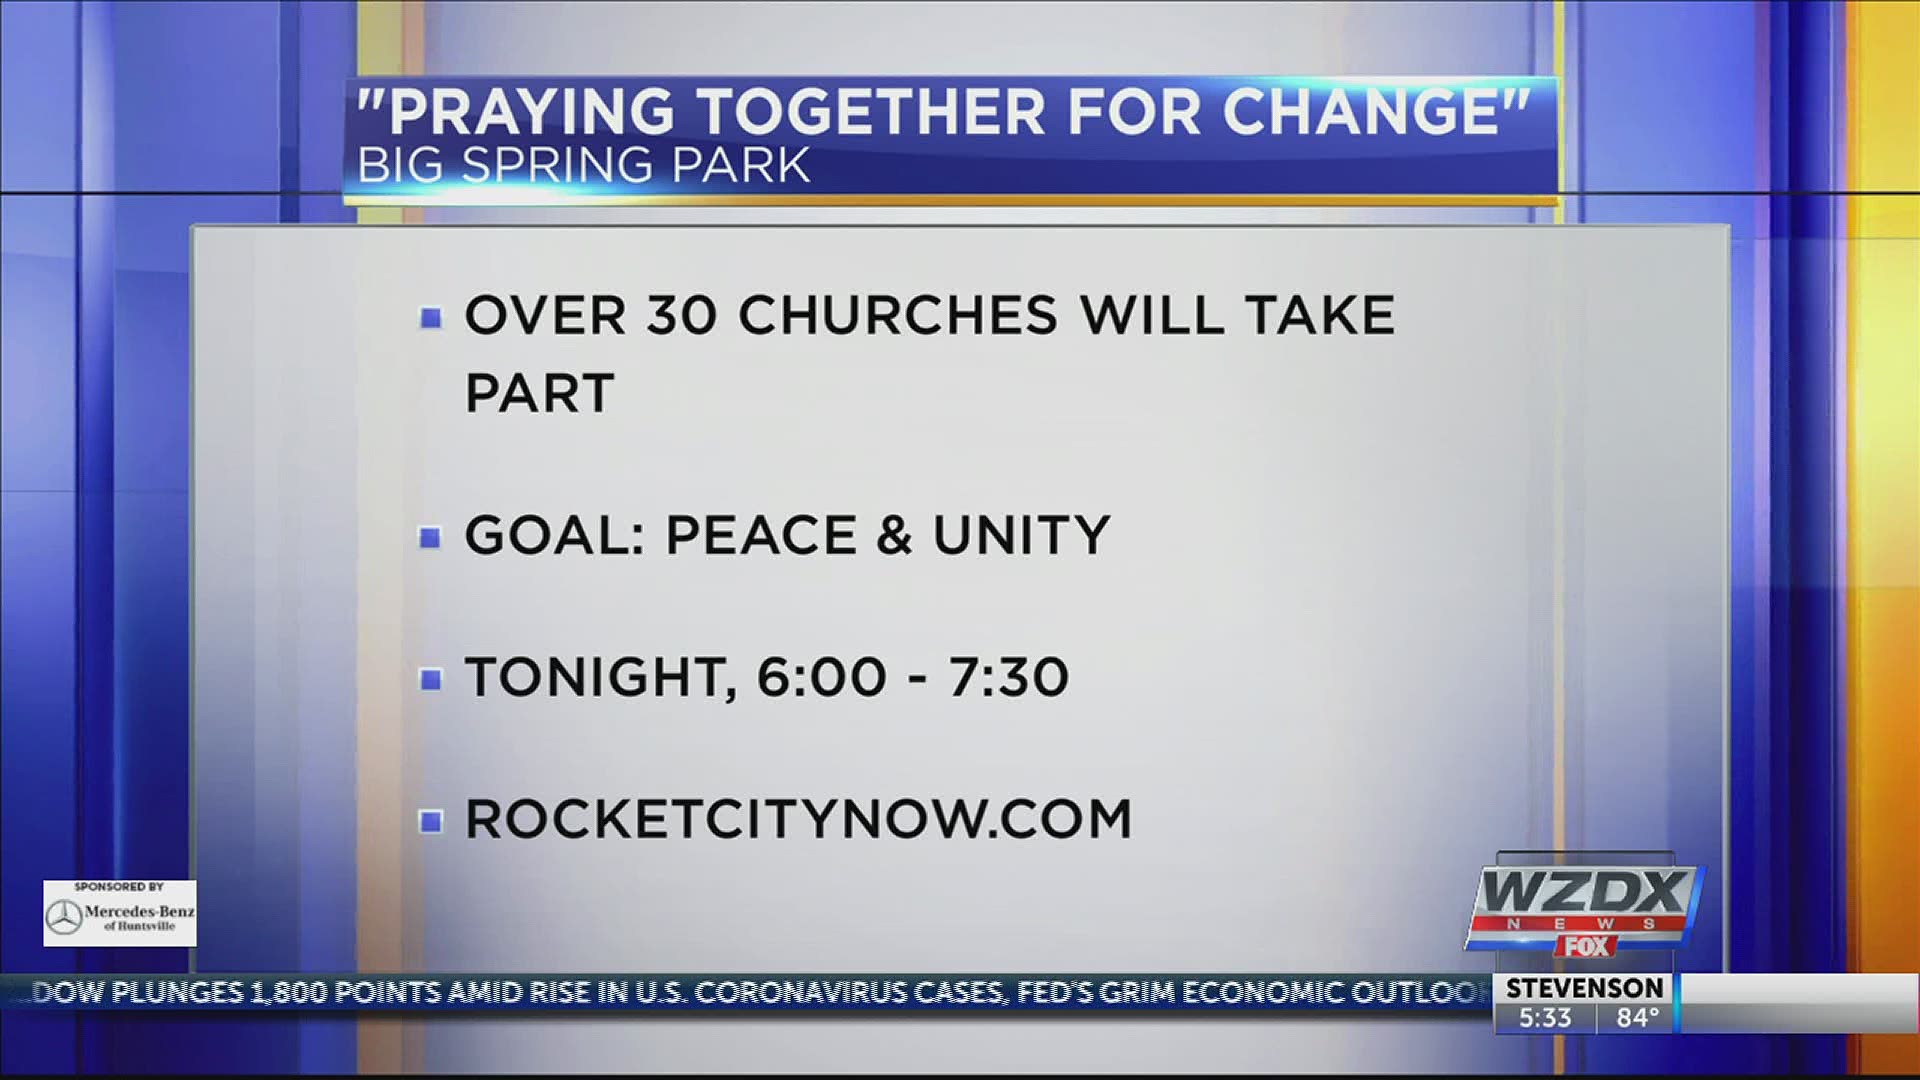 Organizers say the purpose is to come together and pray for healing and restoration, strength and unity.